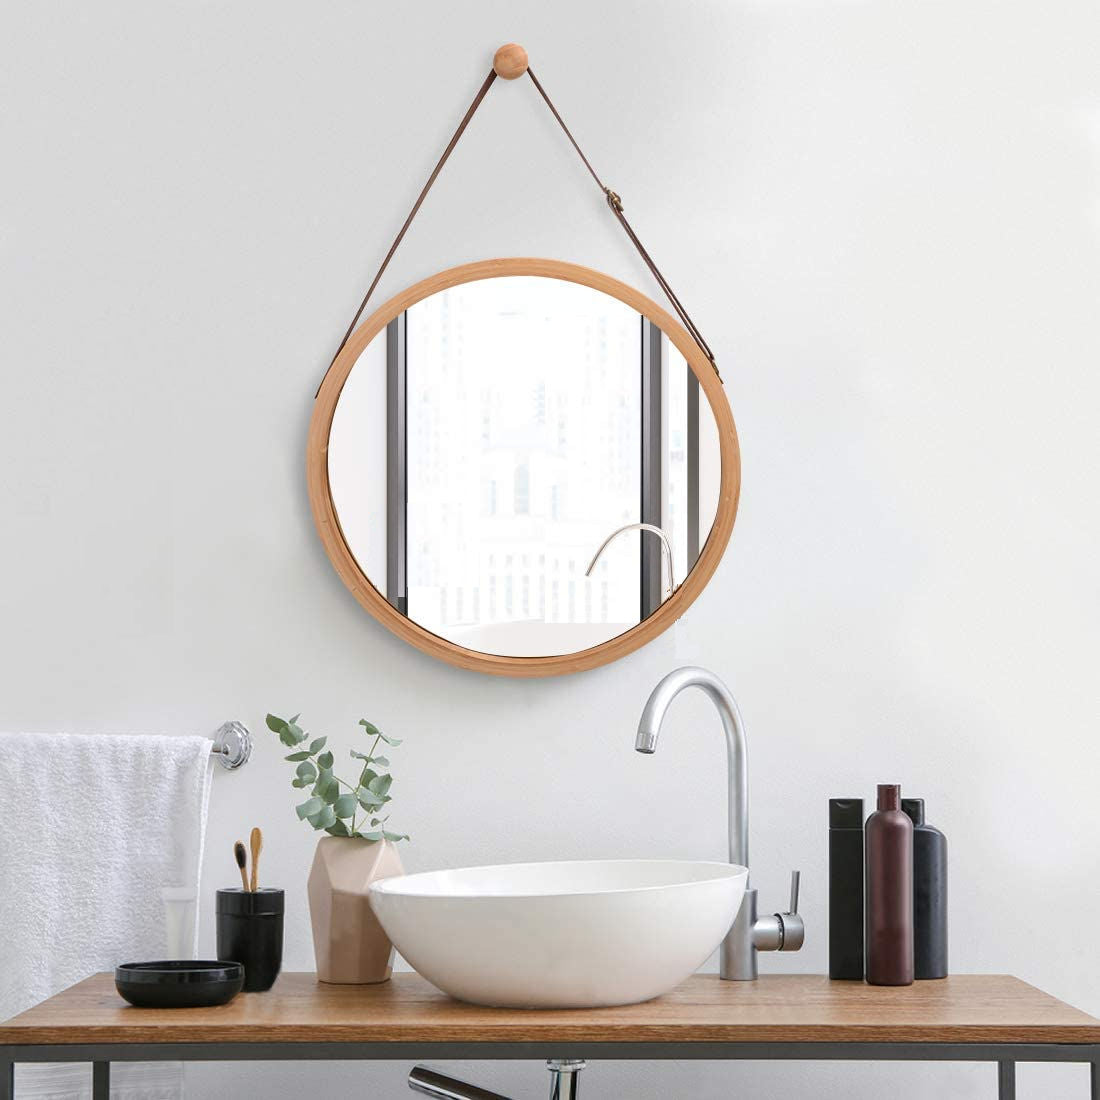 Hanging Round Wall Mirror 45 cm - Solid Bamboo Frame and Adjustable Leather Strap for Bathroom and Bedroom - BM House & Garden